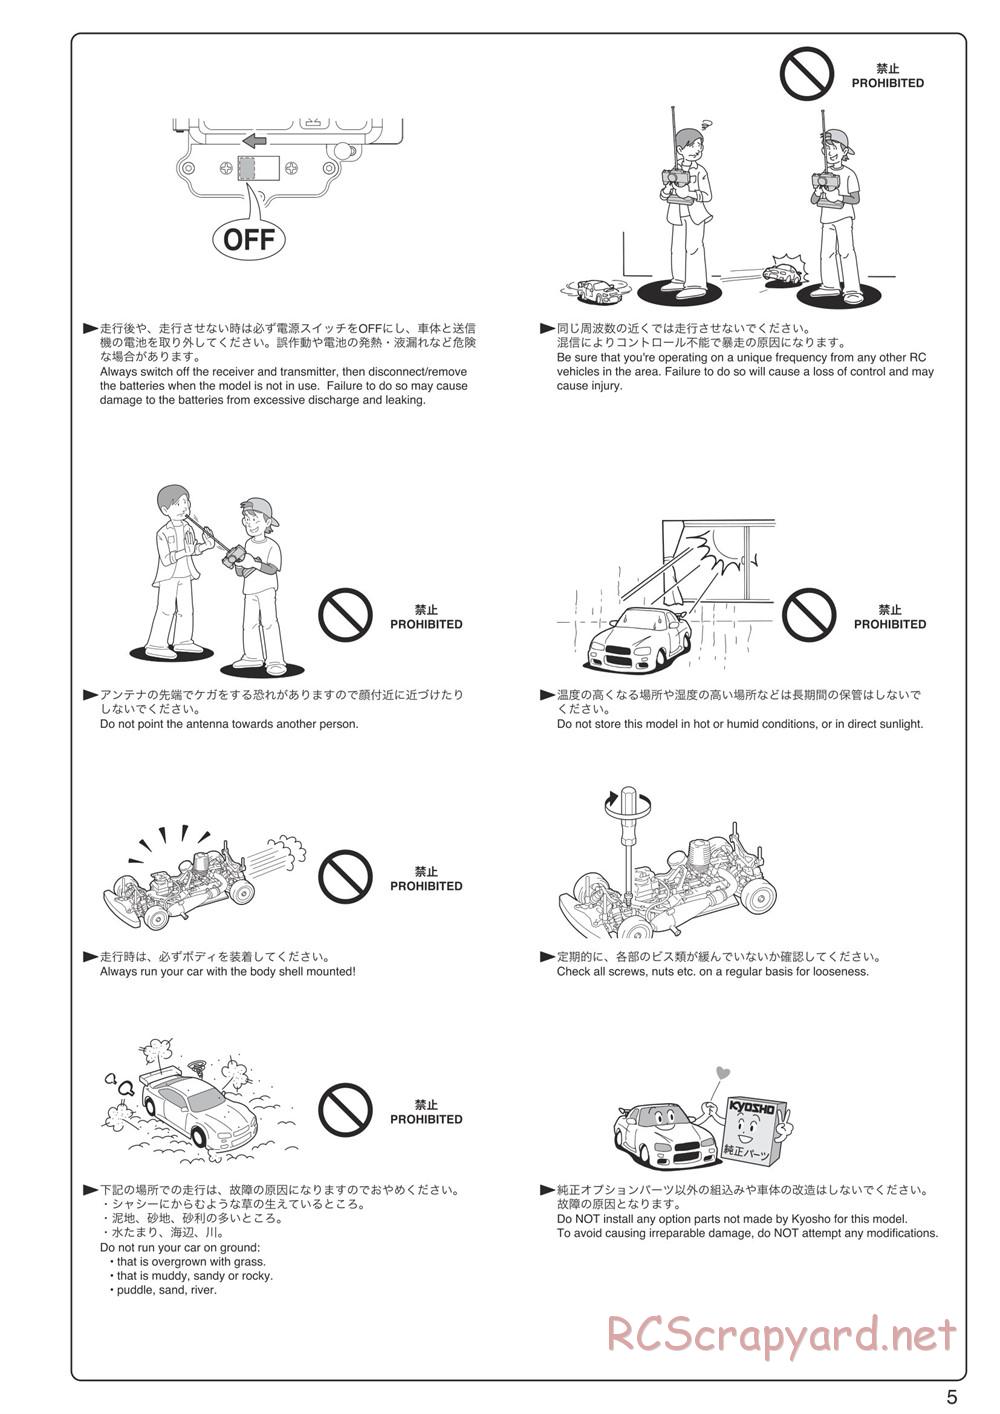 Kyosho - Inferno MP9 TKI4 10th Anniversary Special Edition - Manual - Page 5